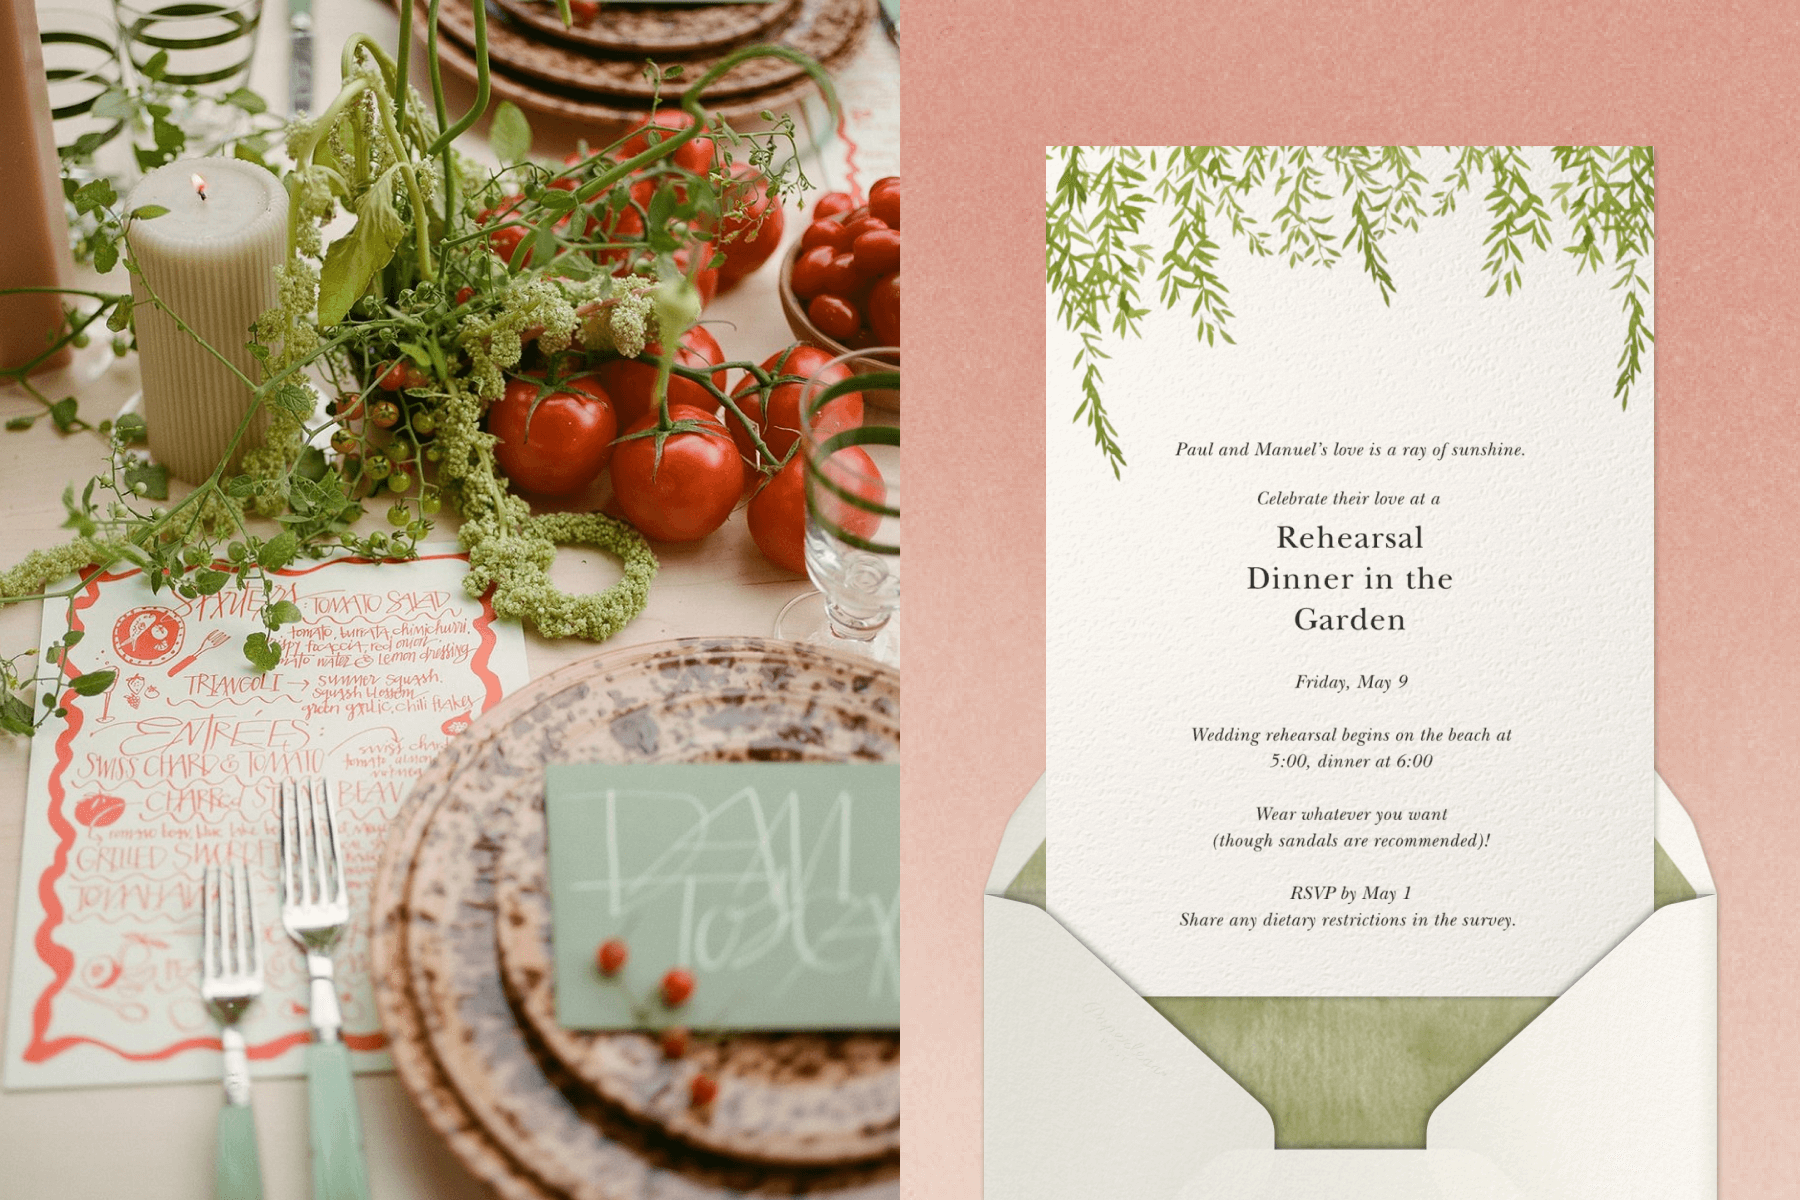 Left: A garden-themed table setting with tomatoes as a centerpiece; Right: A rehearsal dinner invitation with delicate green leaves on the top